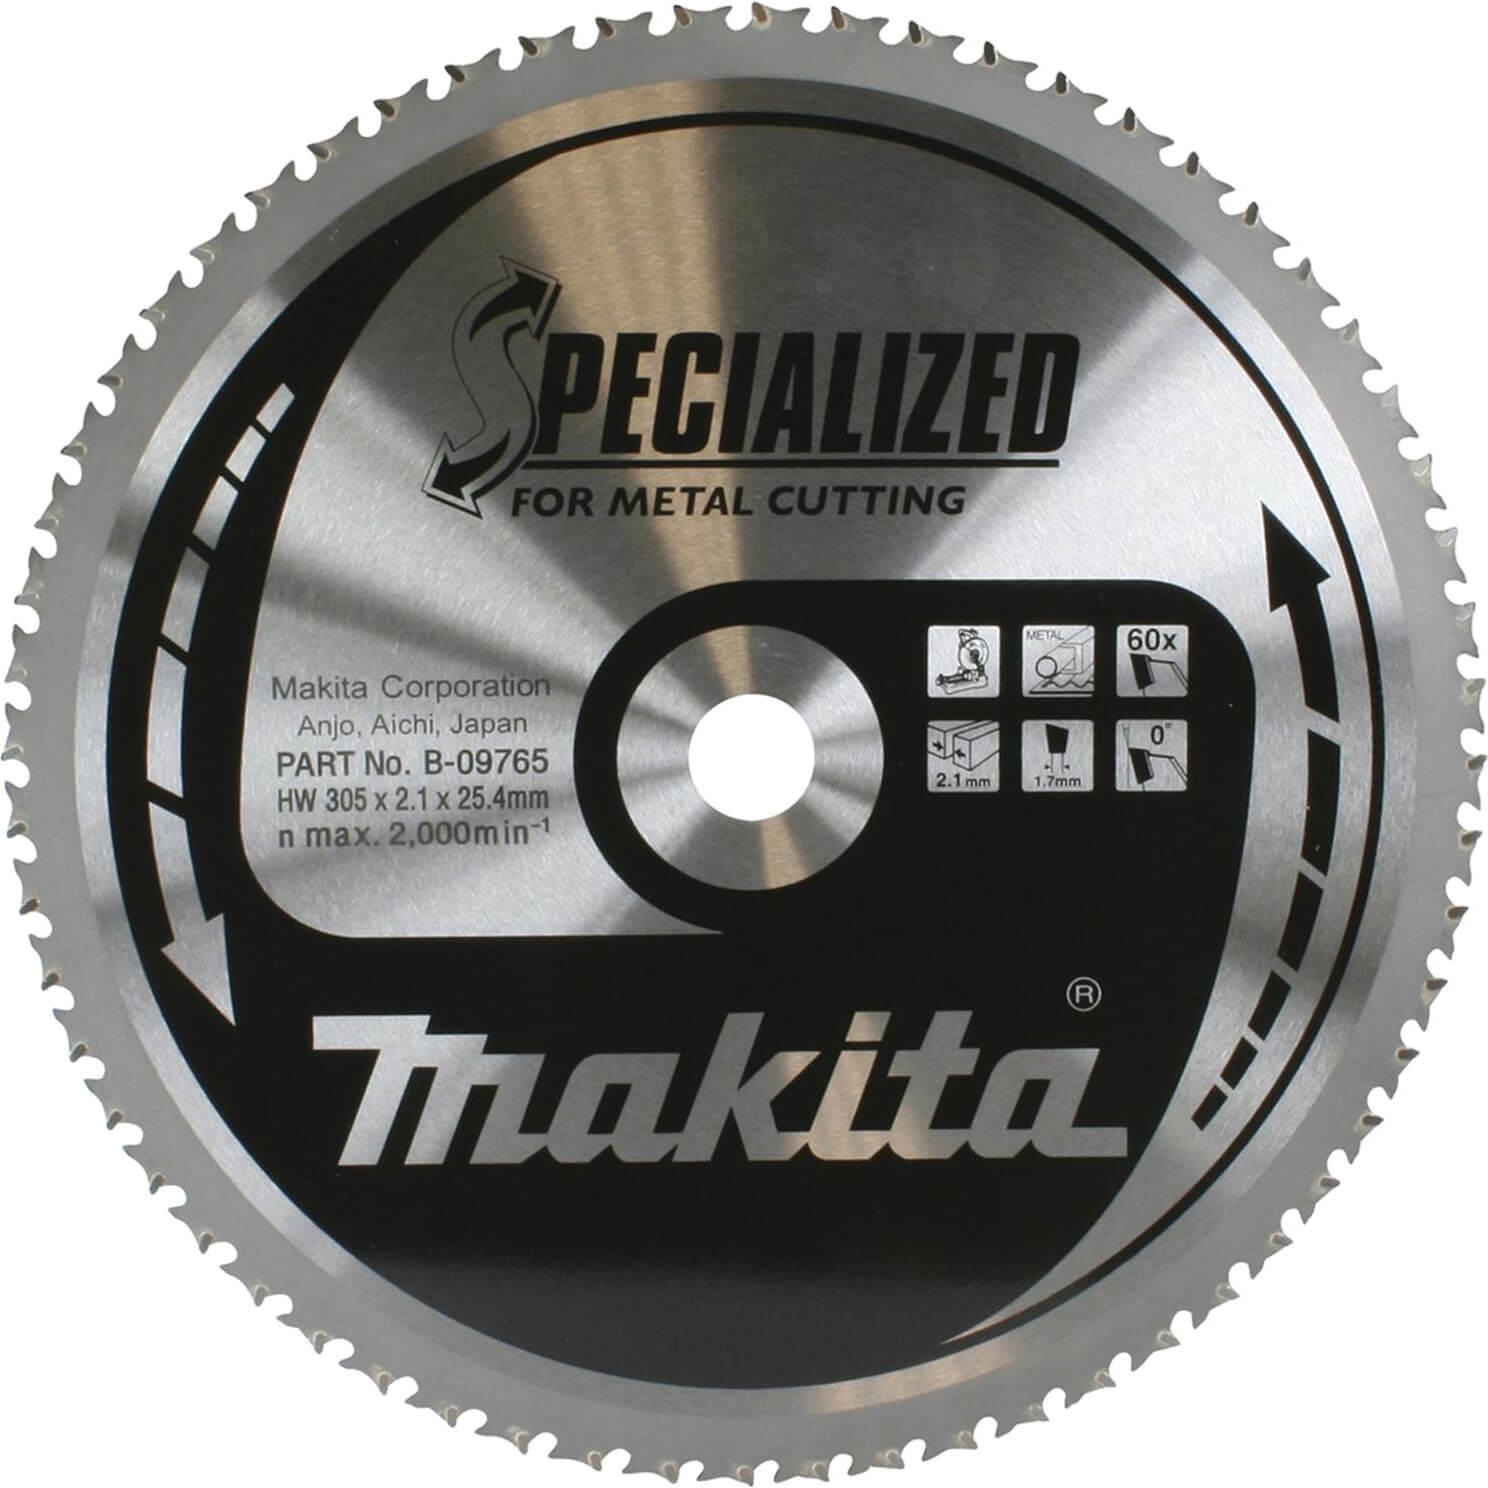 Photos - Power Tool Accessory Makita SPECIALIZED Metal Cutting Saw Blade 305mm 78T 25.4mm B-09793 